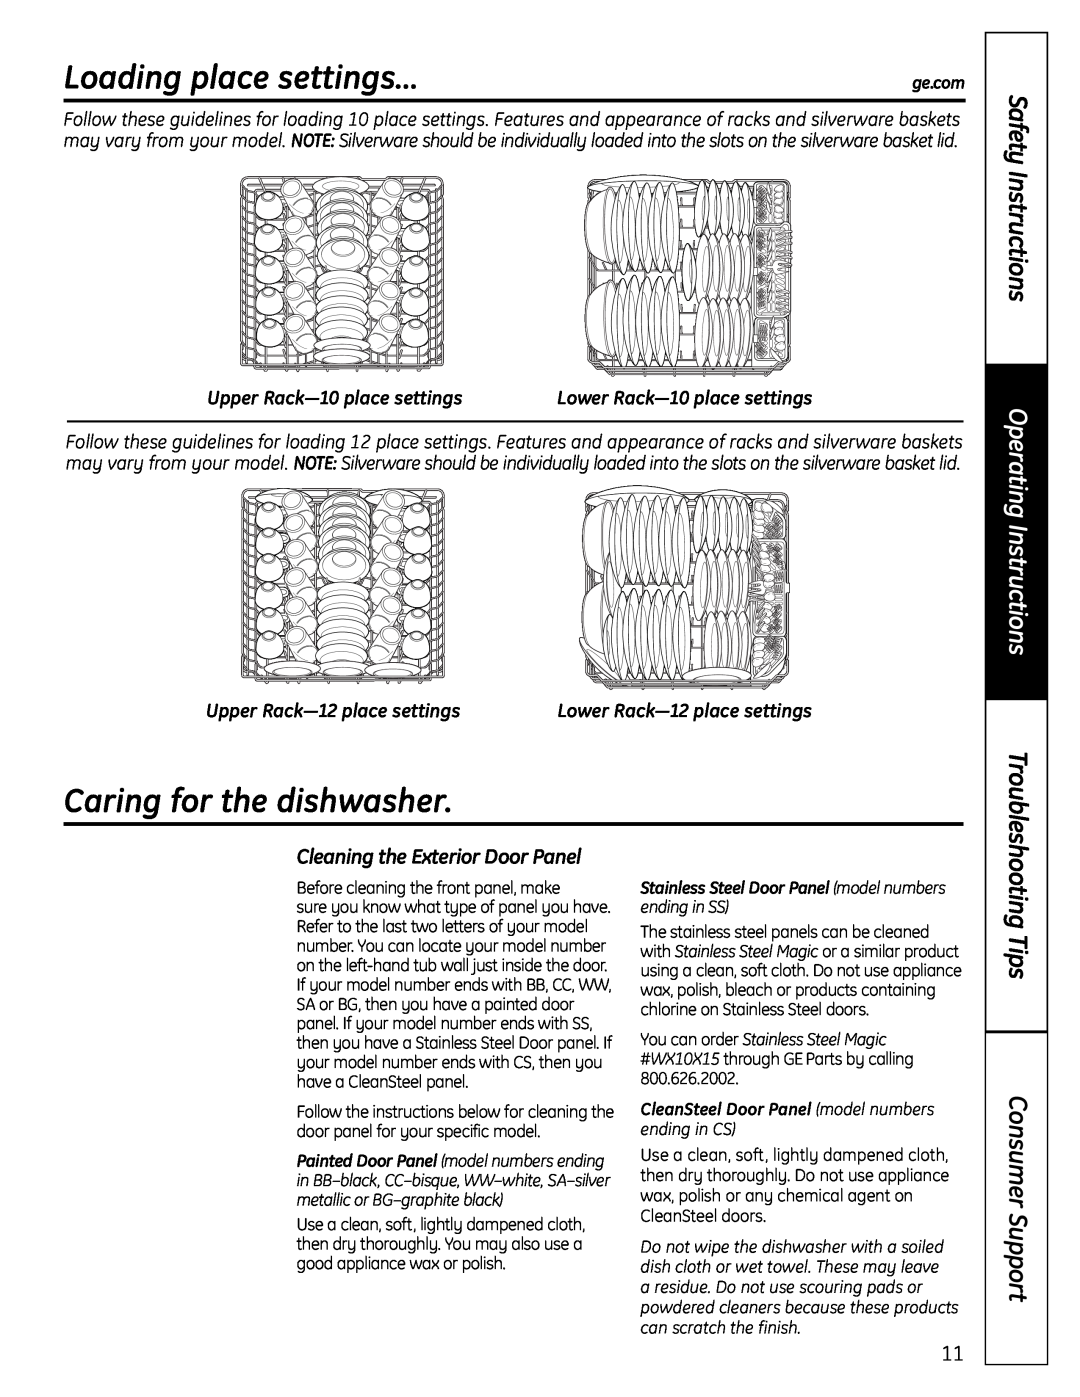 GE 165D4700P382 Loading place settings…, Caring for the dishwasher, Tips Consumer Support, Upper Rack—10place settings 